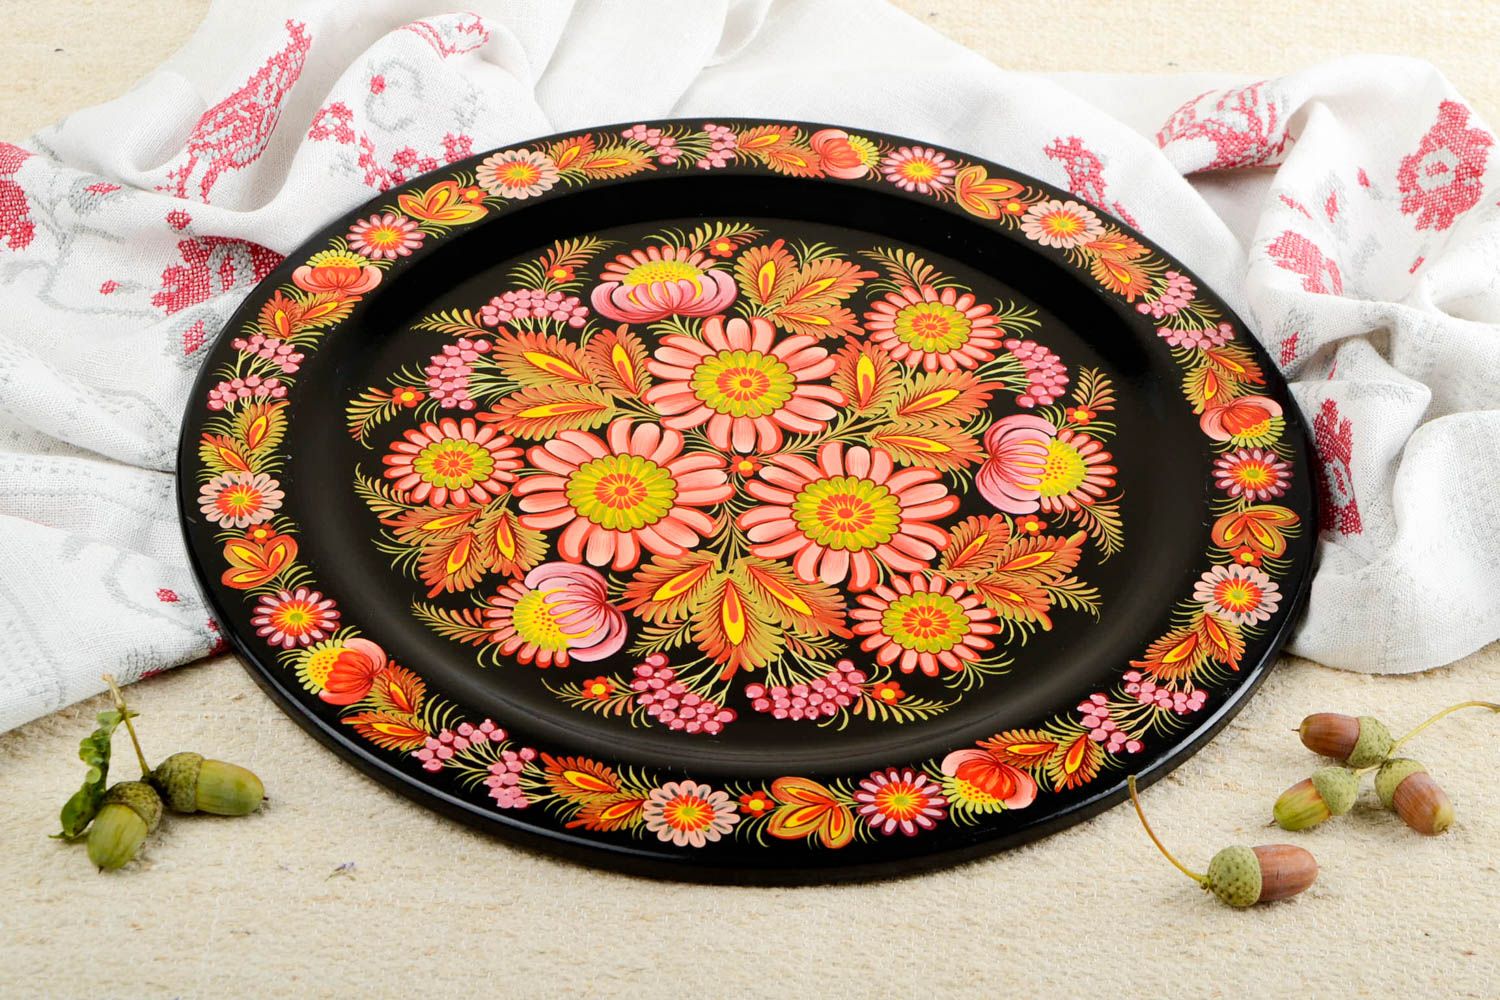 Handmade wooden painted plate designer cute wall decor decorative use only photo 1